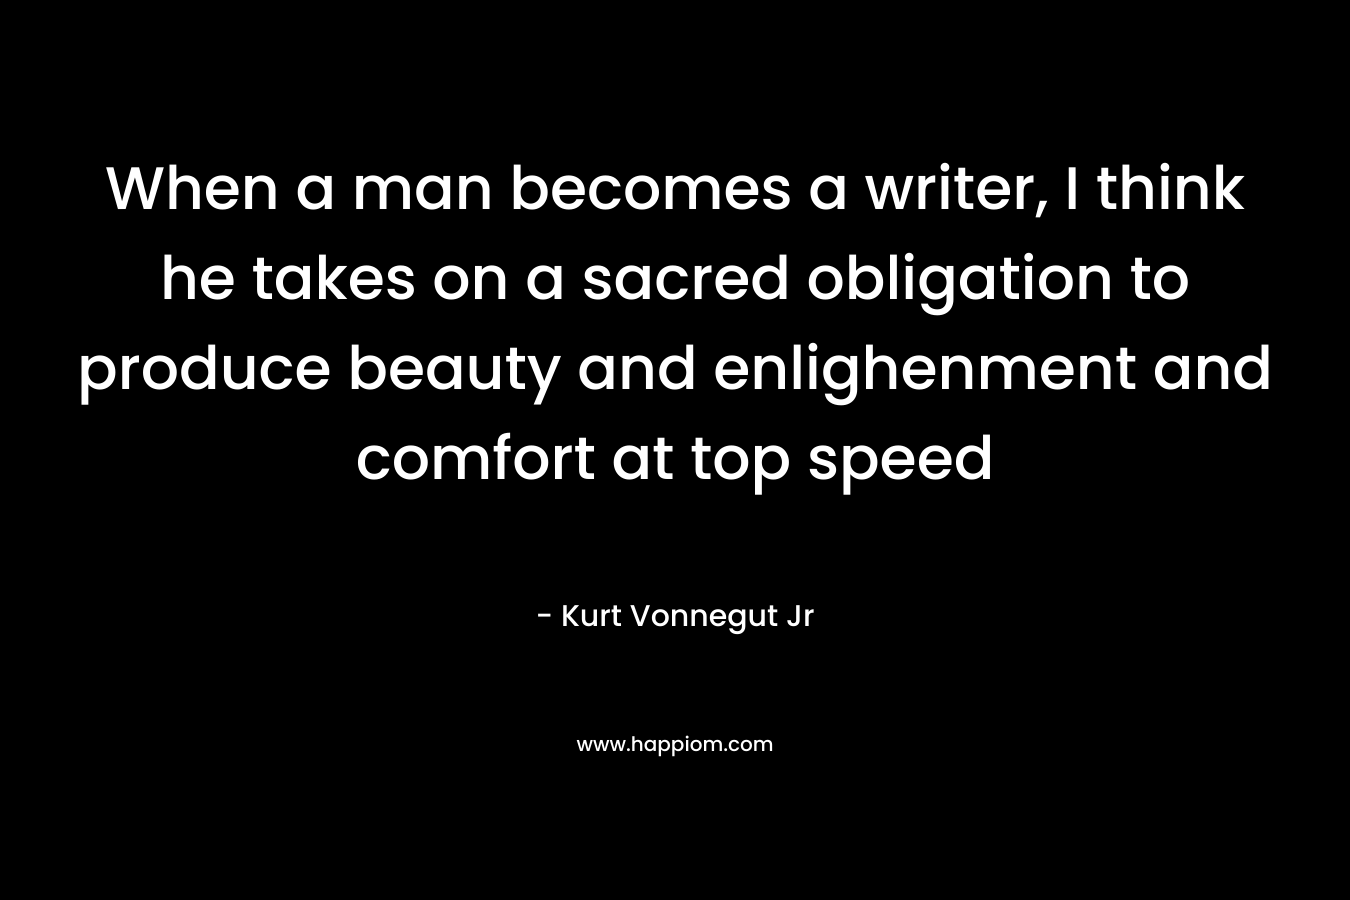 When a man becomes a writer, I think he takes on a sacred obligation to produce beauty and enlighenment and comfort at top speed